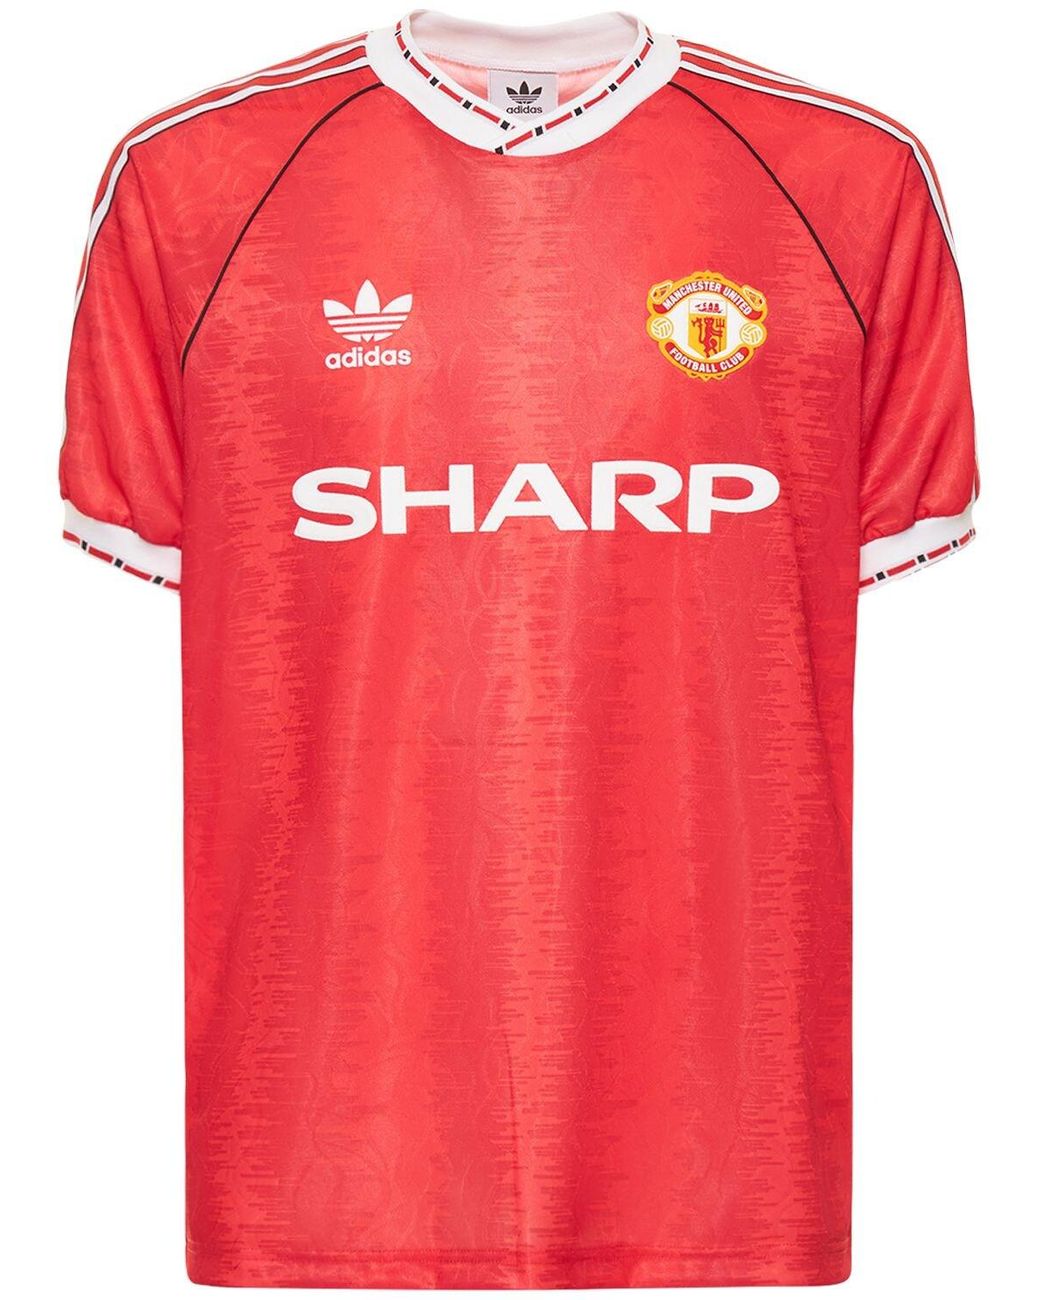 adidas Originals Manchester United 90 Home T-shirt in Bright Red (Red ...